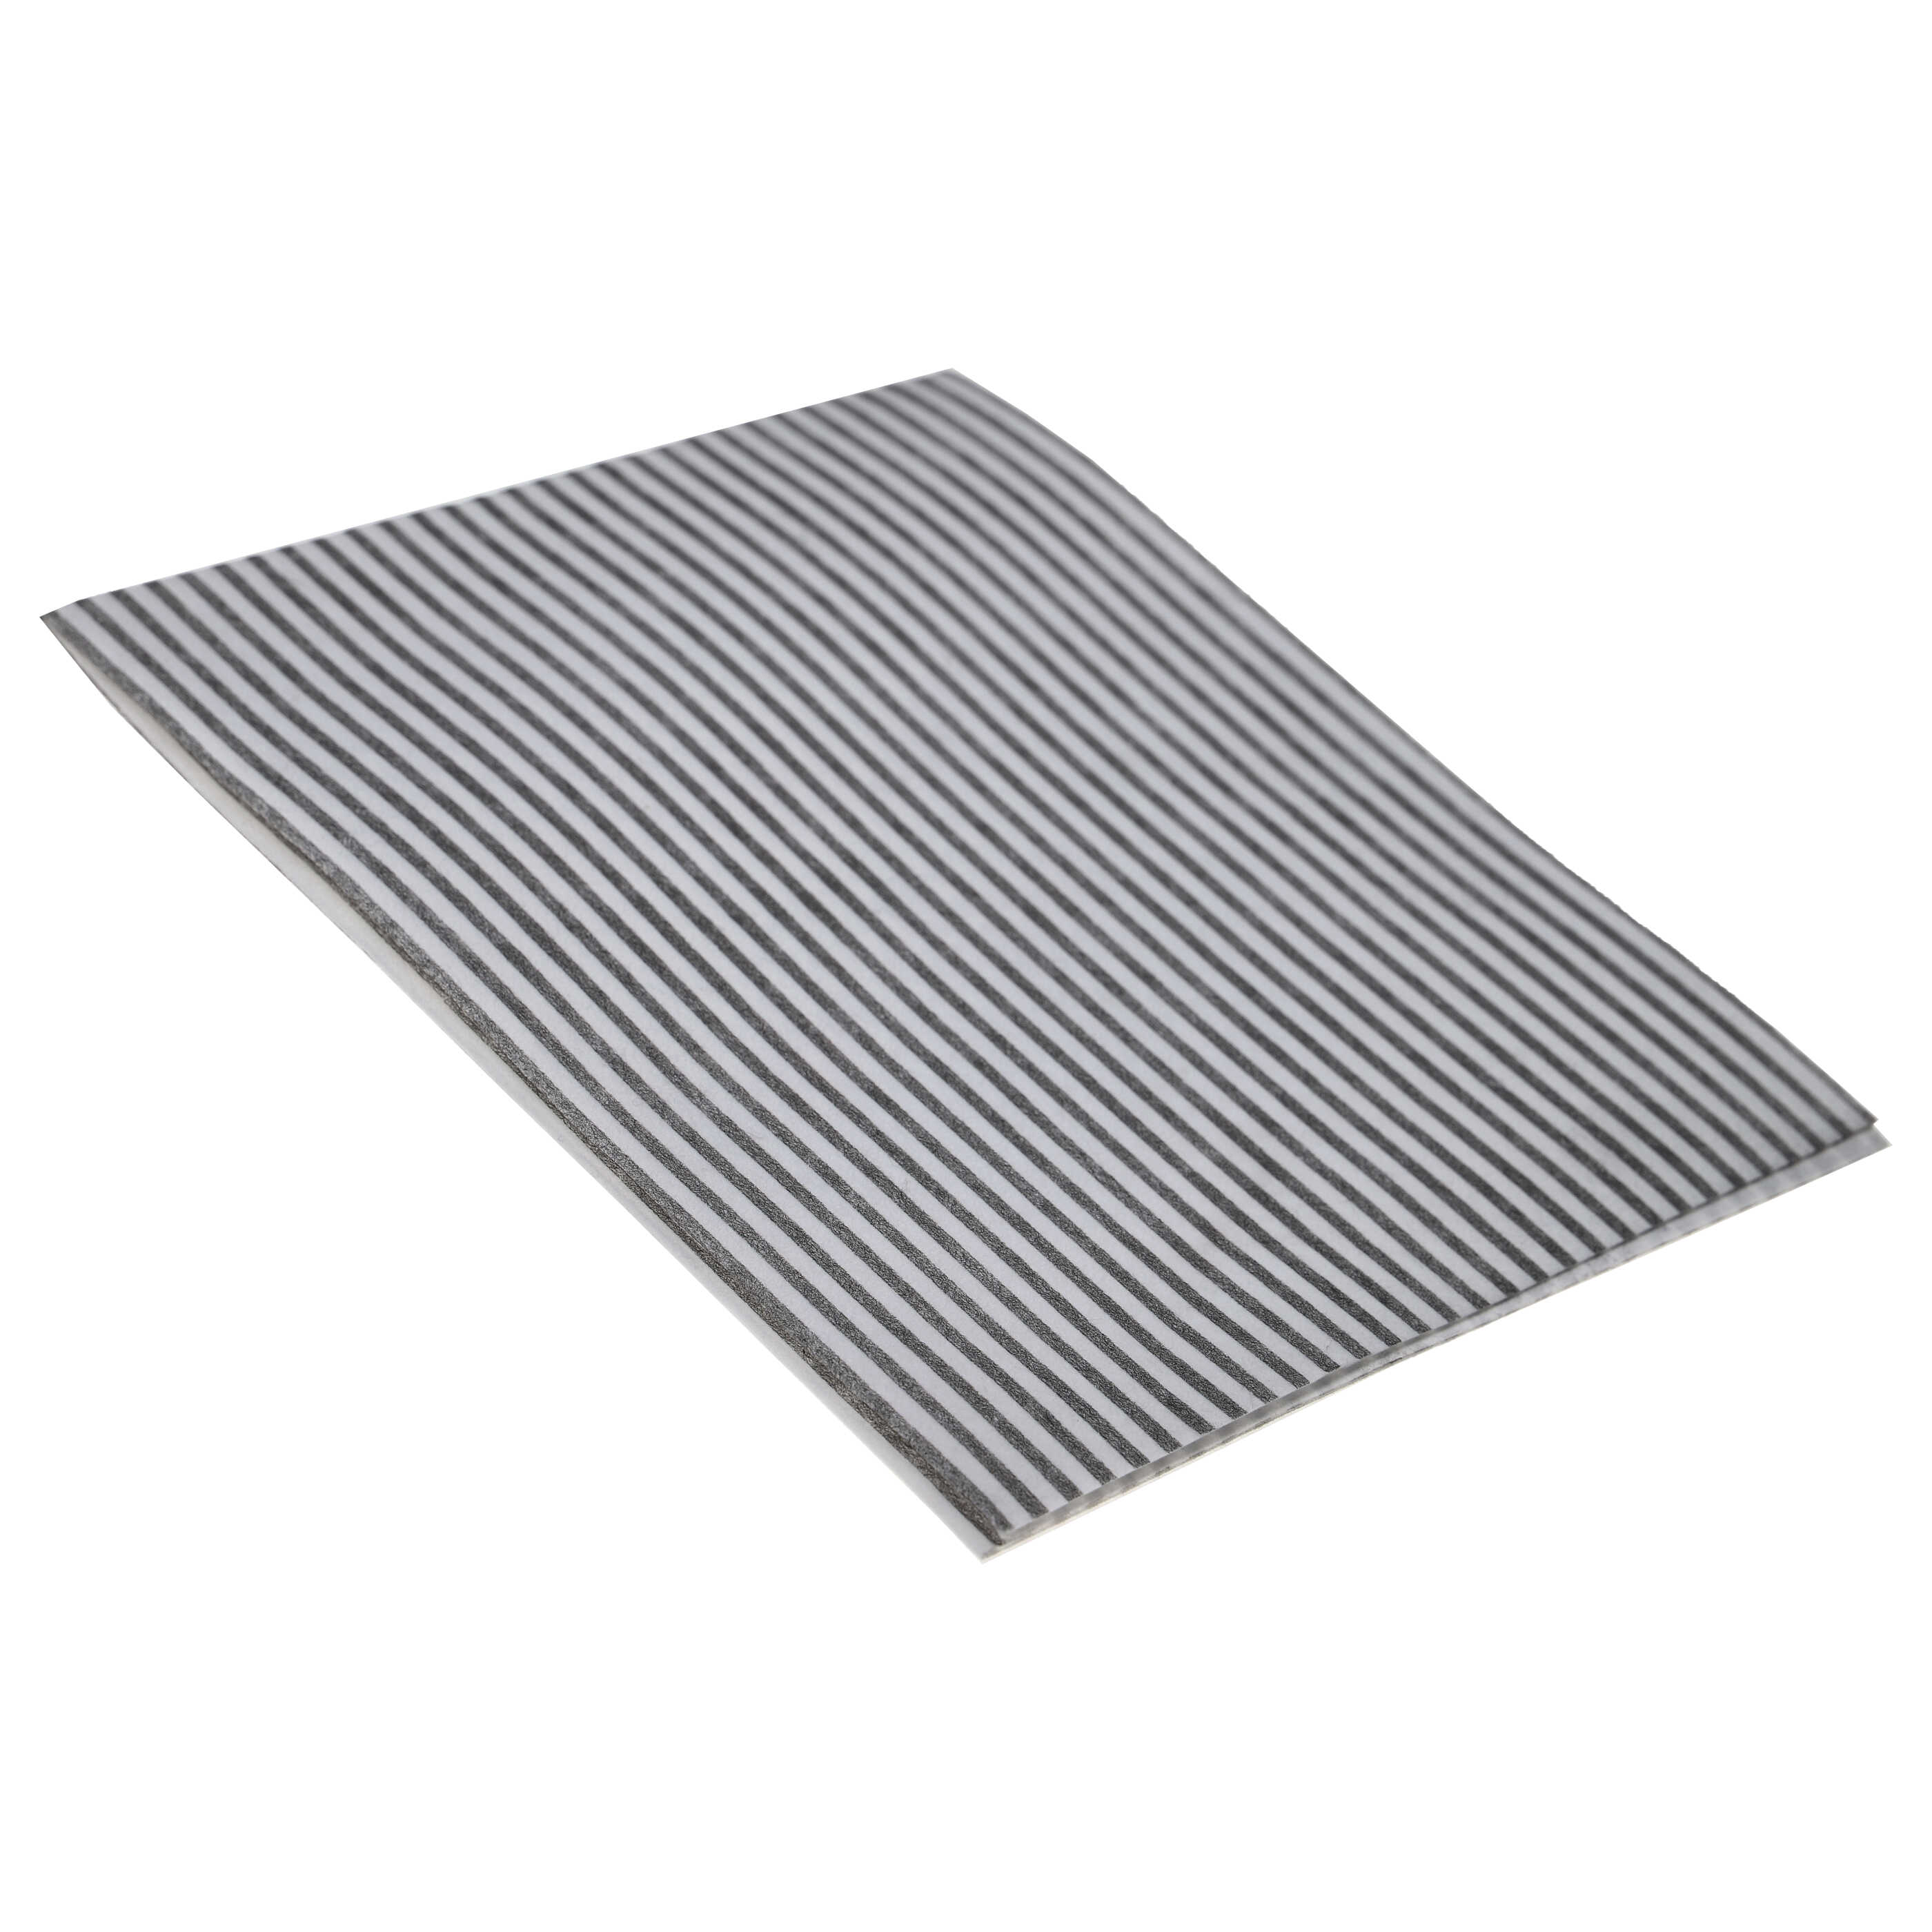 Extraction Hood Filter - 57 x 47 x 0.3 cm